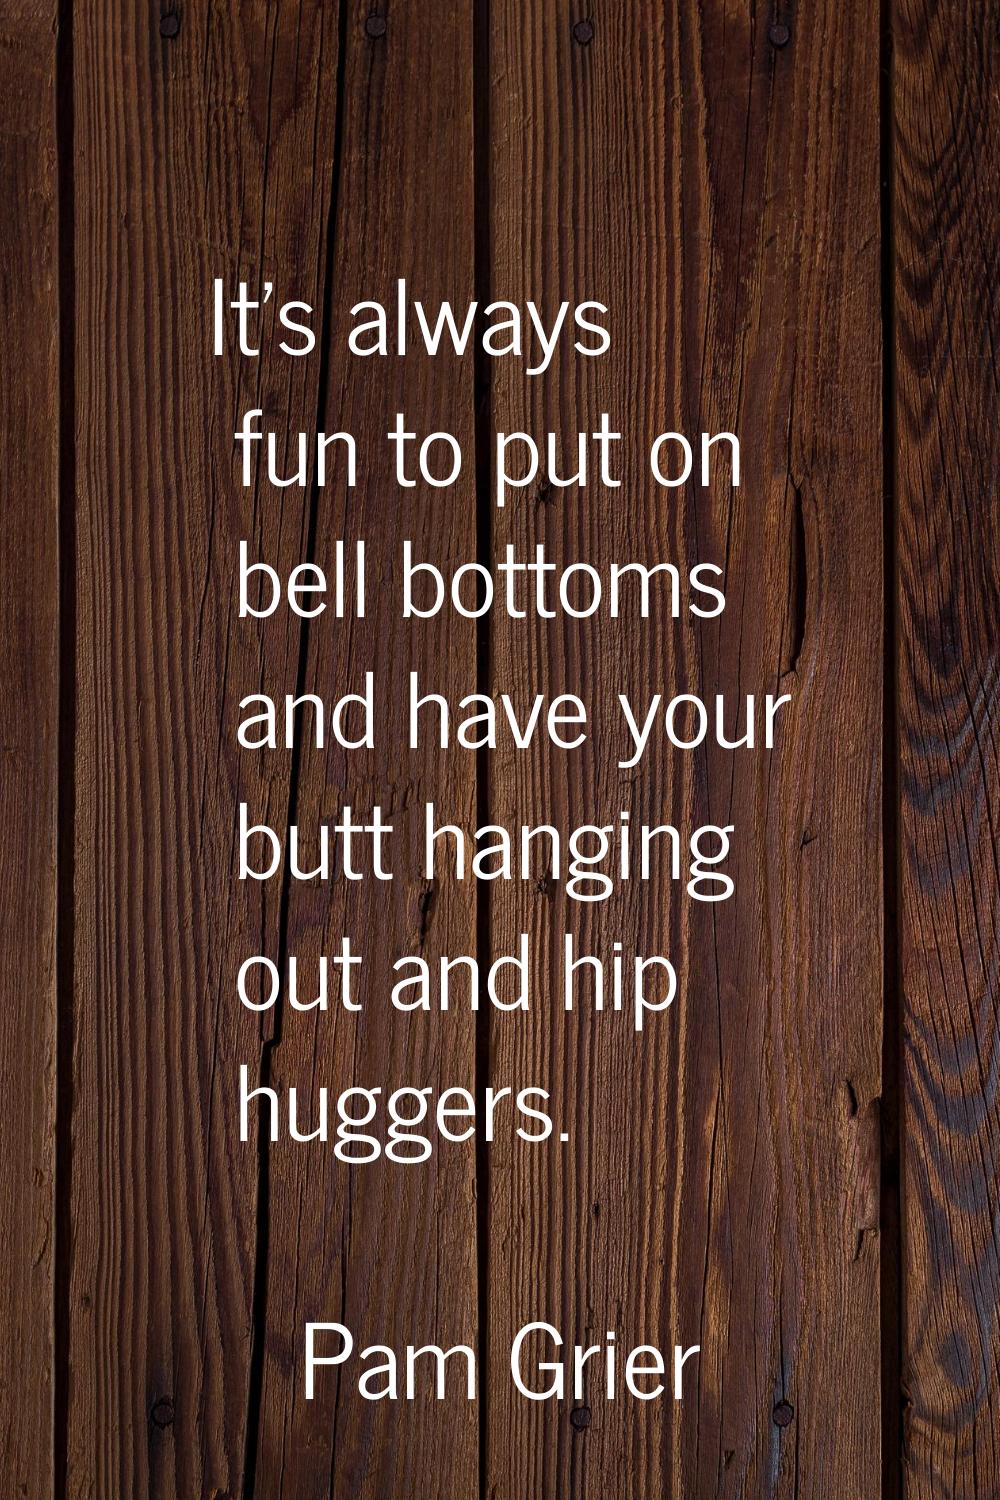 It's always fun to put on bell bottoms and have your butt hanging out and hip huggers.